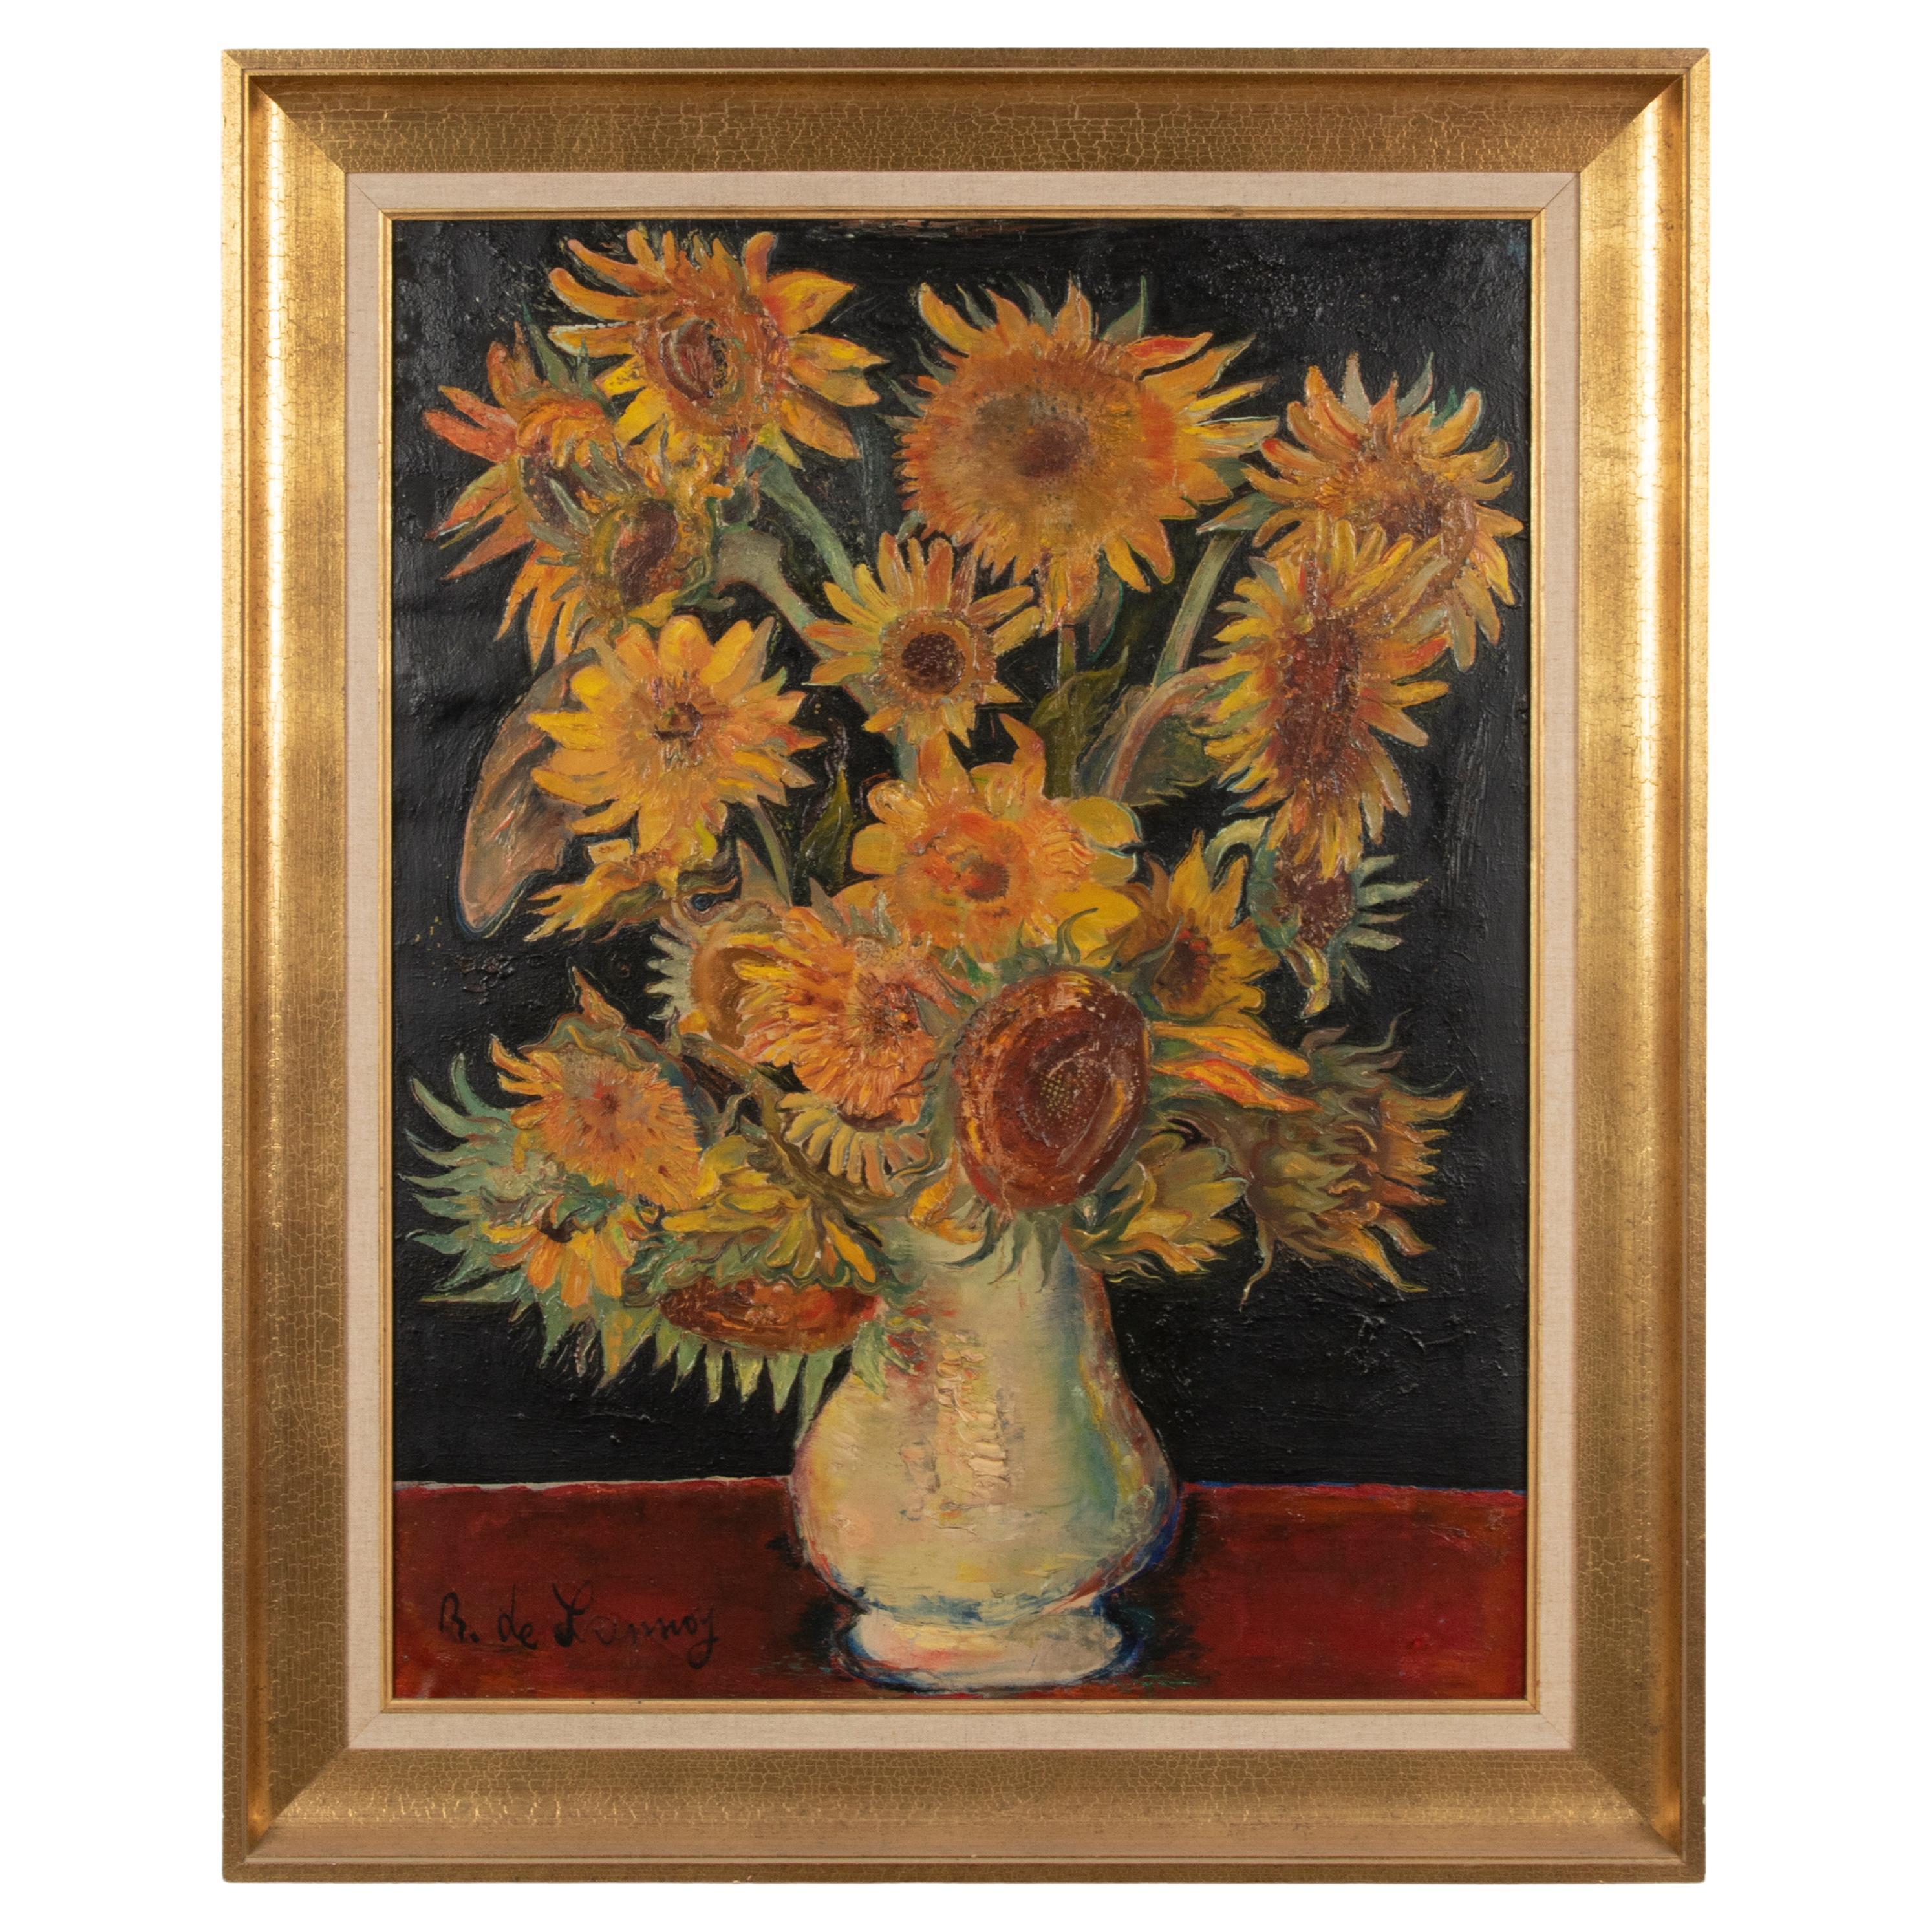 Mid-20th Century, Oil Painting Flower Still Life with Sunflowers in a Vase